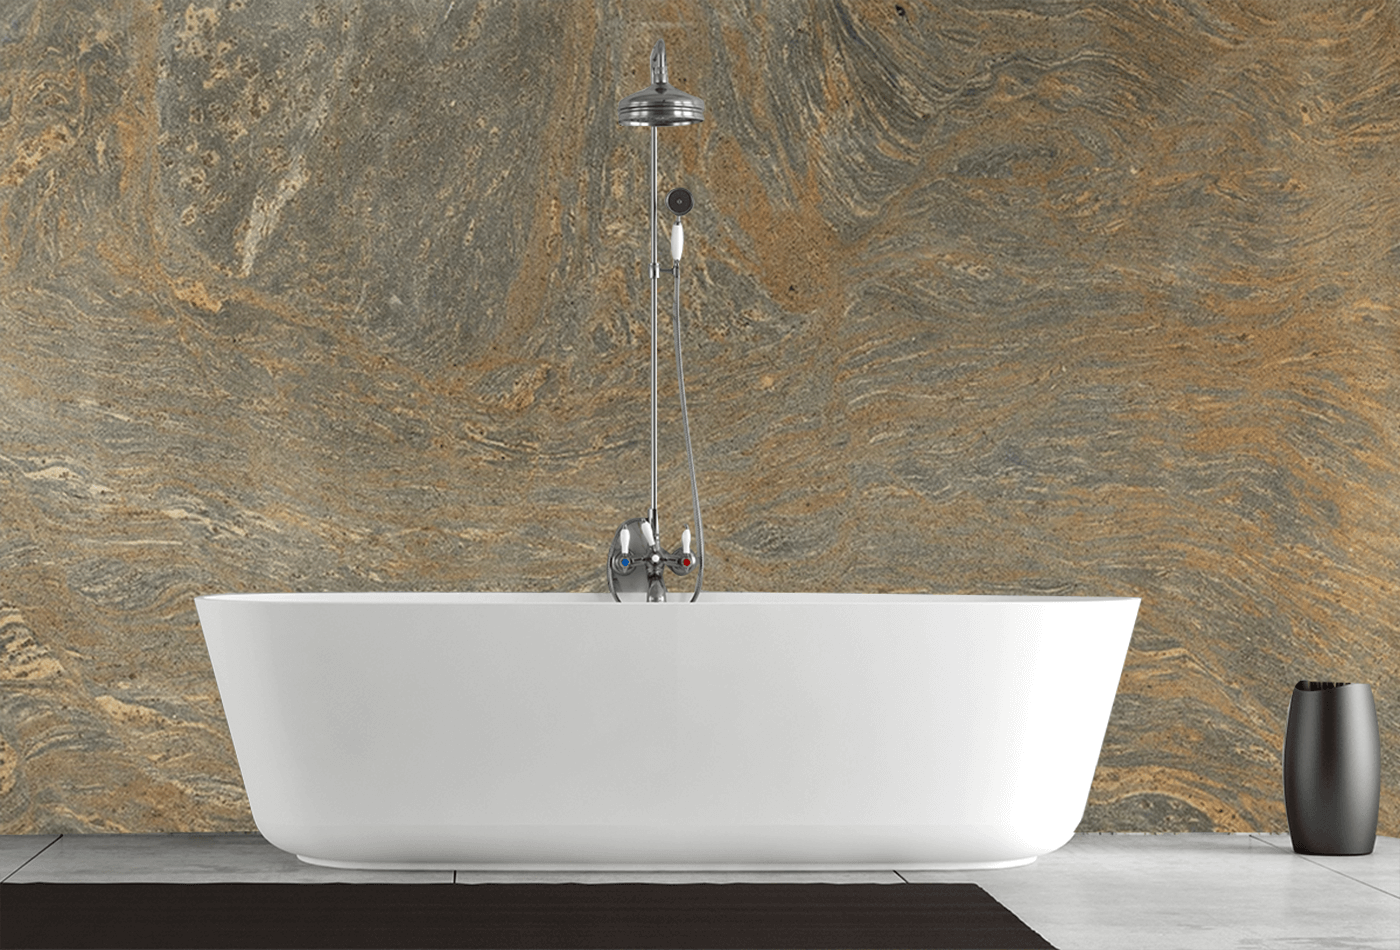 Decorate Your Bathroom with this Brown Granite for Chic Look